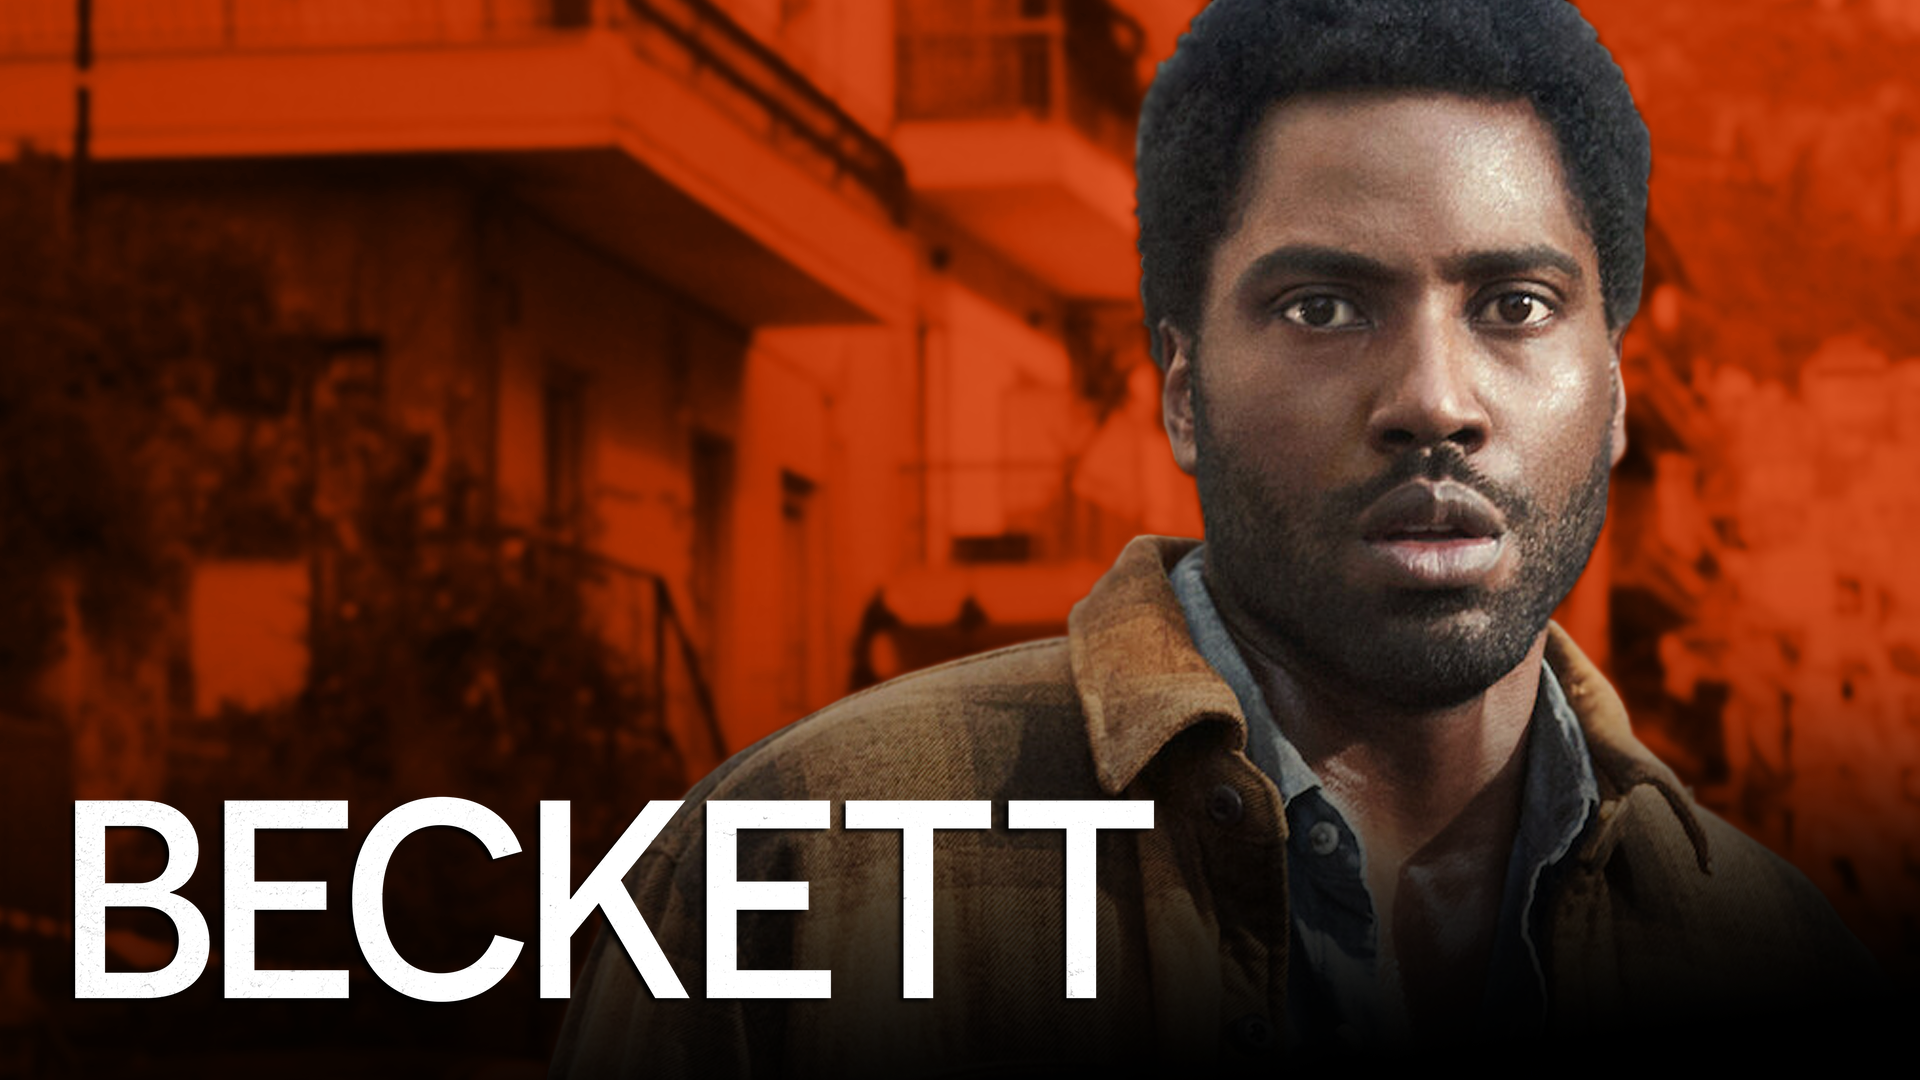 Starring John David Washington, Beckett is a throwback to 70s thriller in the best way. It is akin to throwing yourself into an action movie and failing successfully